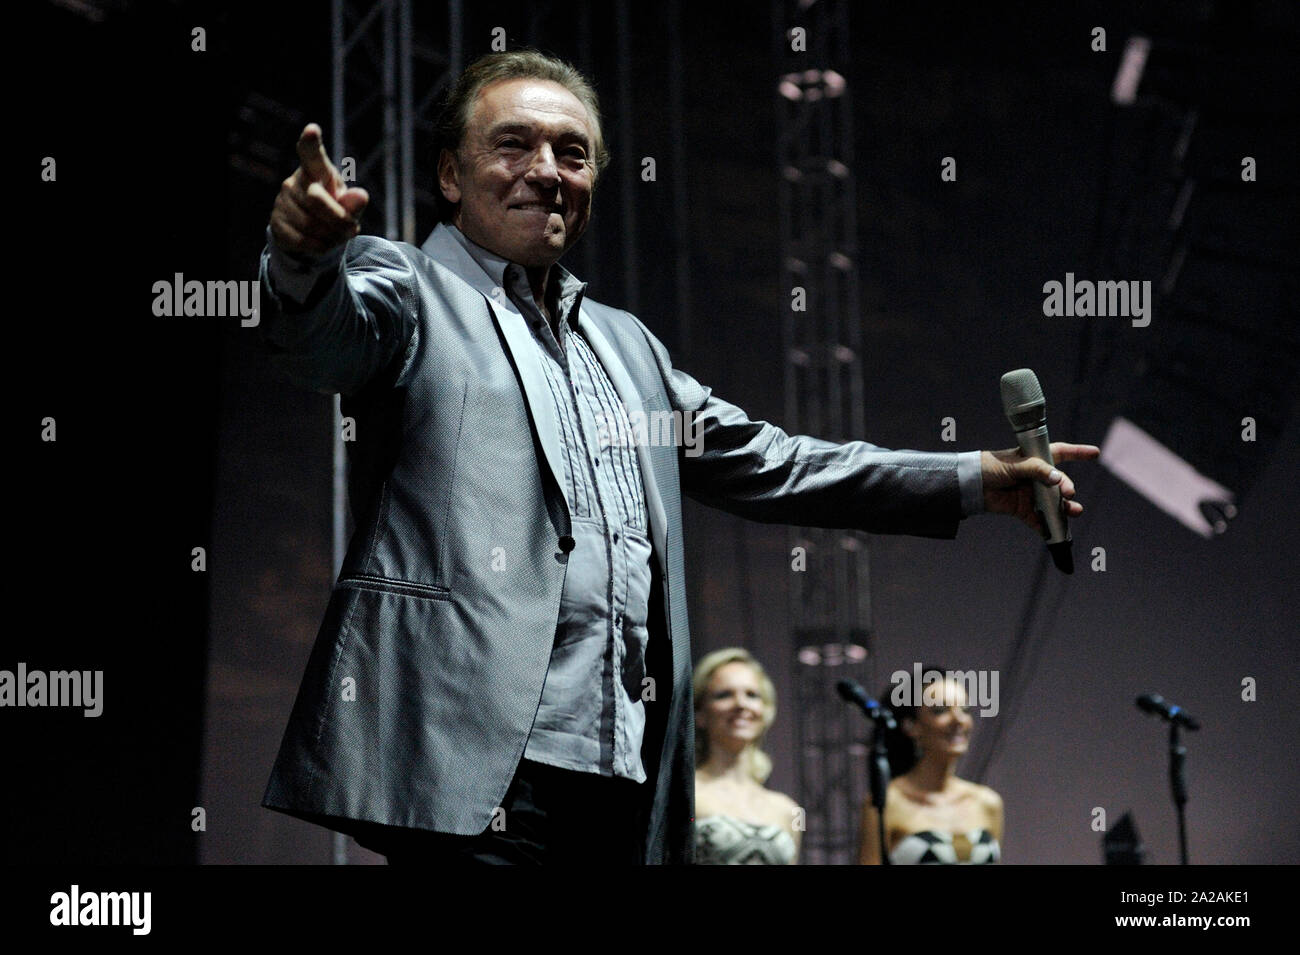 Hradec Kralove, Czech Republic. 04th July, 2013. Czech singer Karel Gott performs for the first time within the music festival Rock for People in Hradec Kralove, Czech Republic on July 4, 2013. Credit: David Tanecek/CTK Photo/Alamy Live News Stock Photo